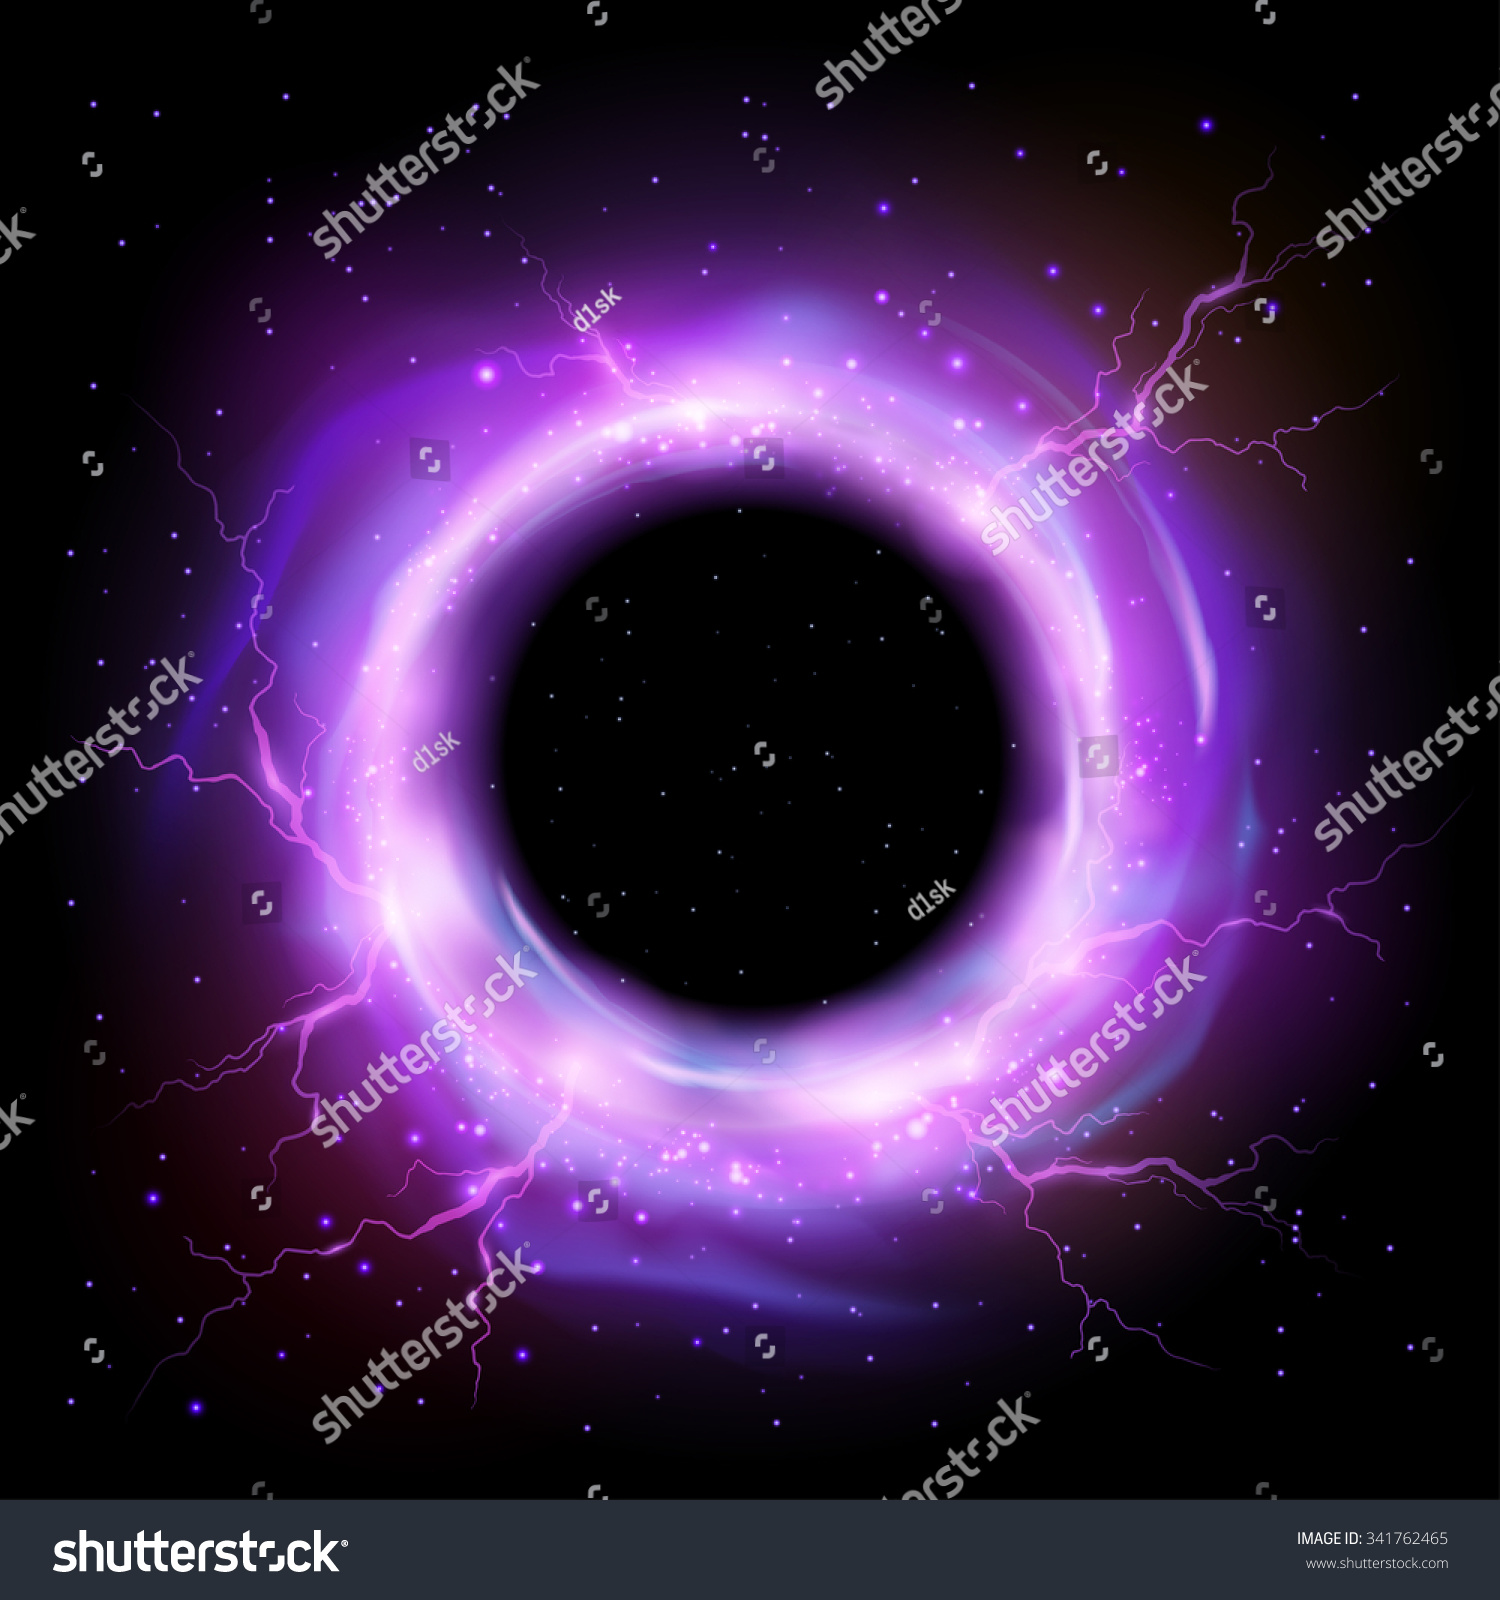 Black Hole Stock Vector (Royalty Free) 341762465 | Shutterstock